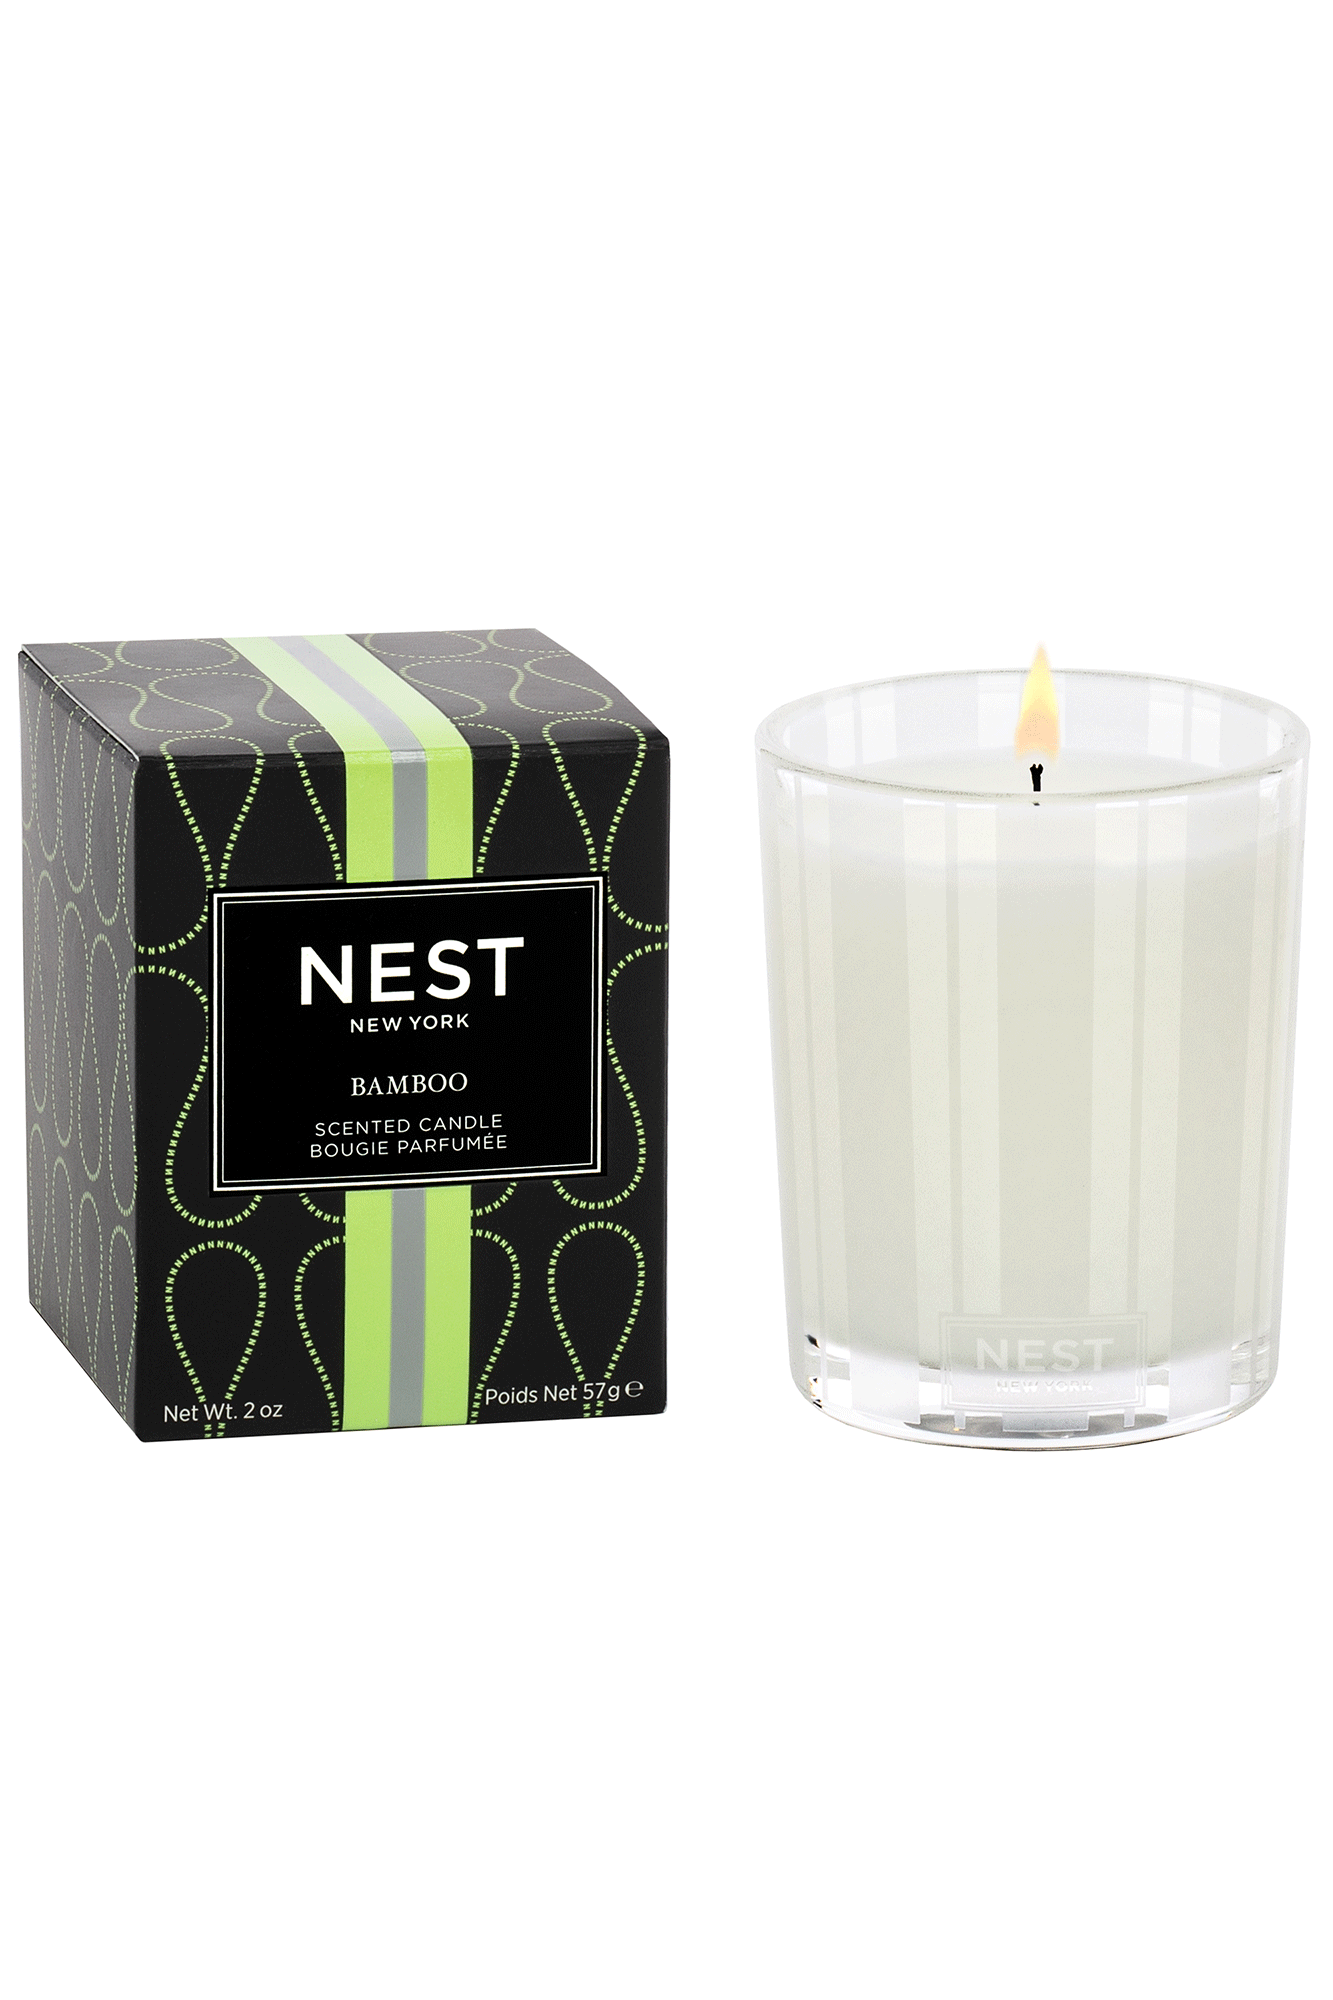 This Bamboo Votive Candle from Nest is a customer favorite for its iconic fragrance. Enjoy a refreshing blend of sweet white florals, lush green notes and sparkling citrus in every burning hour. Create the perfect aroma of a welcoming garden with this bestselling scent.